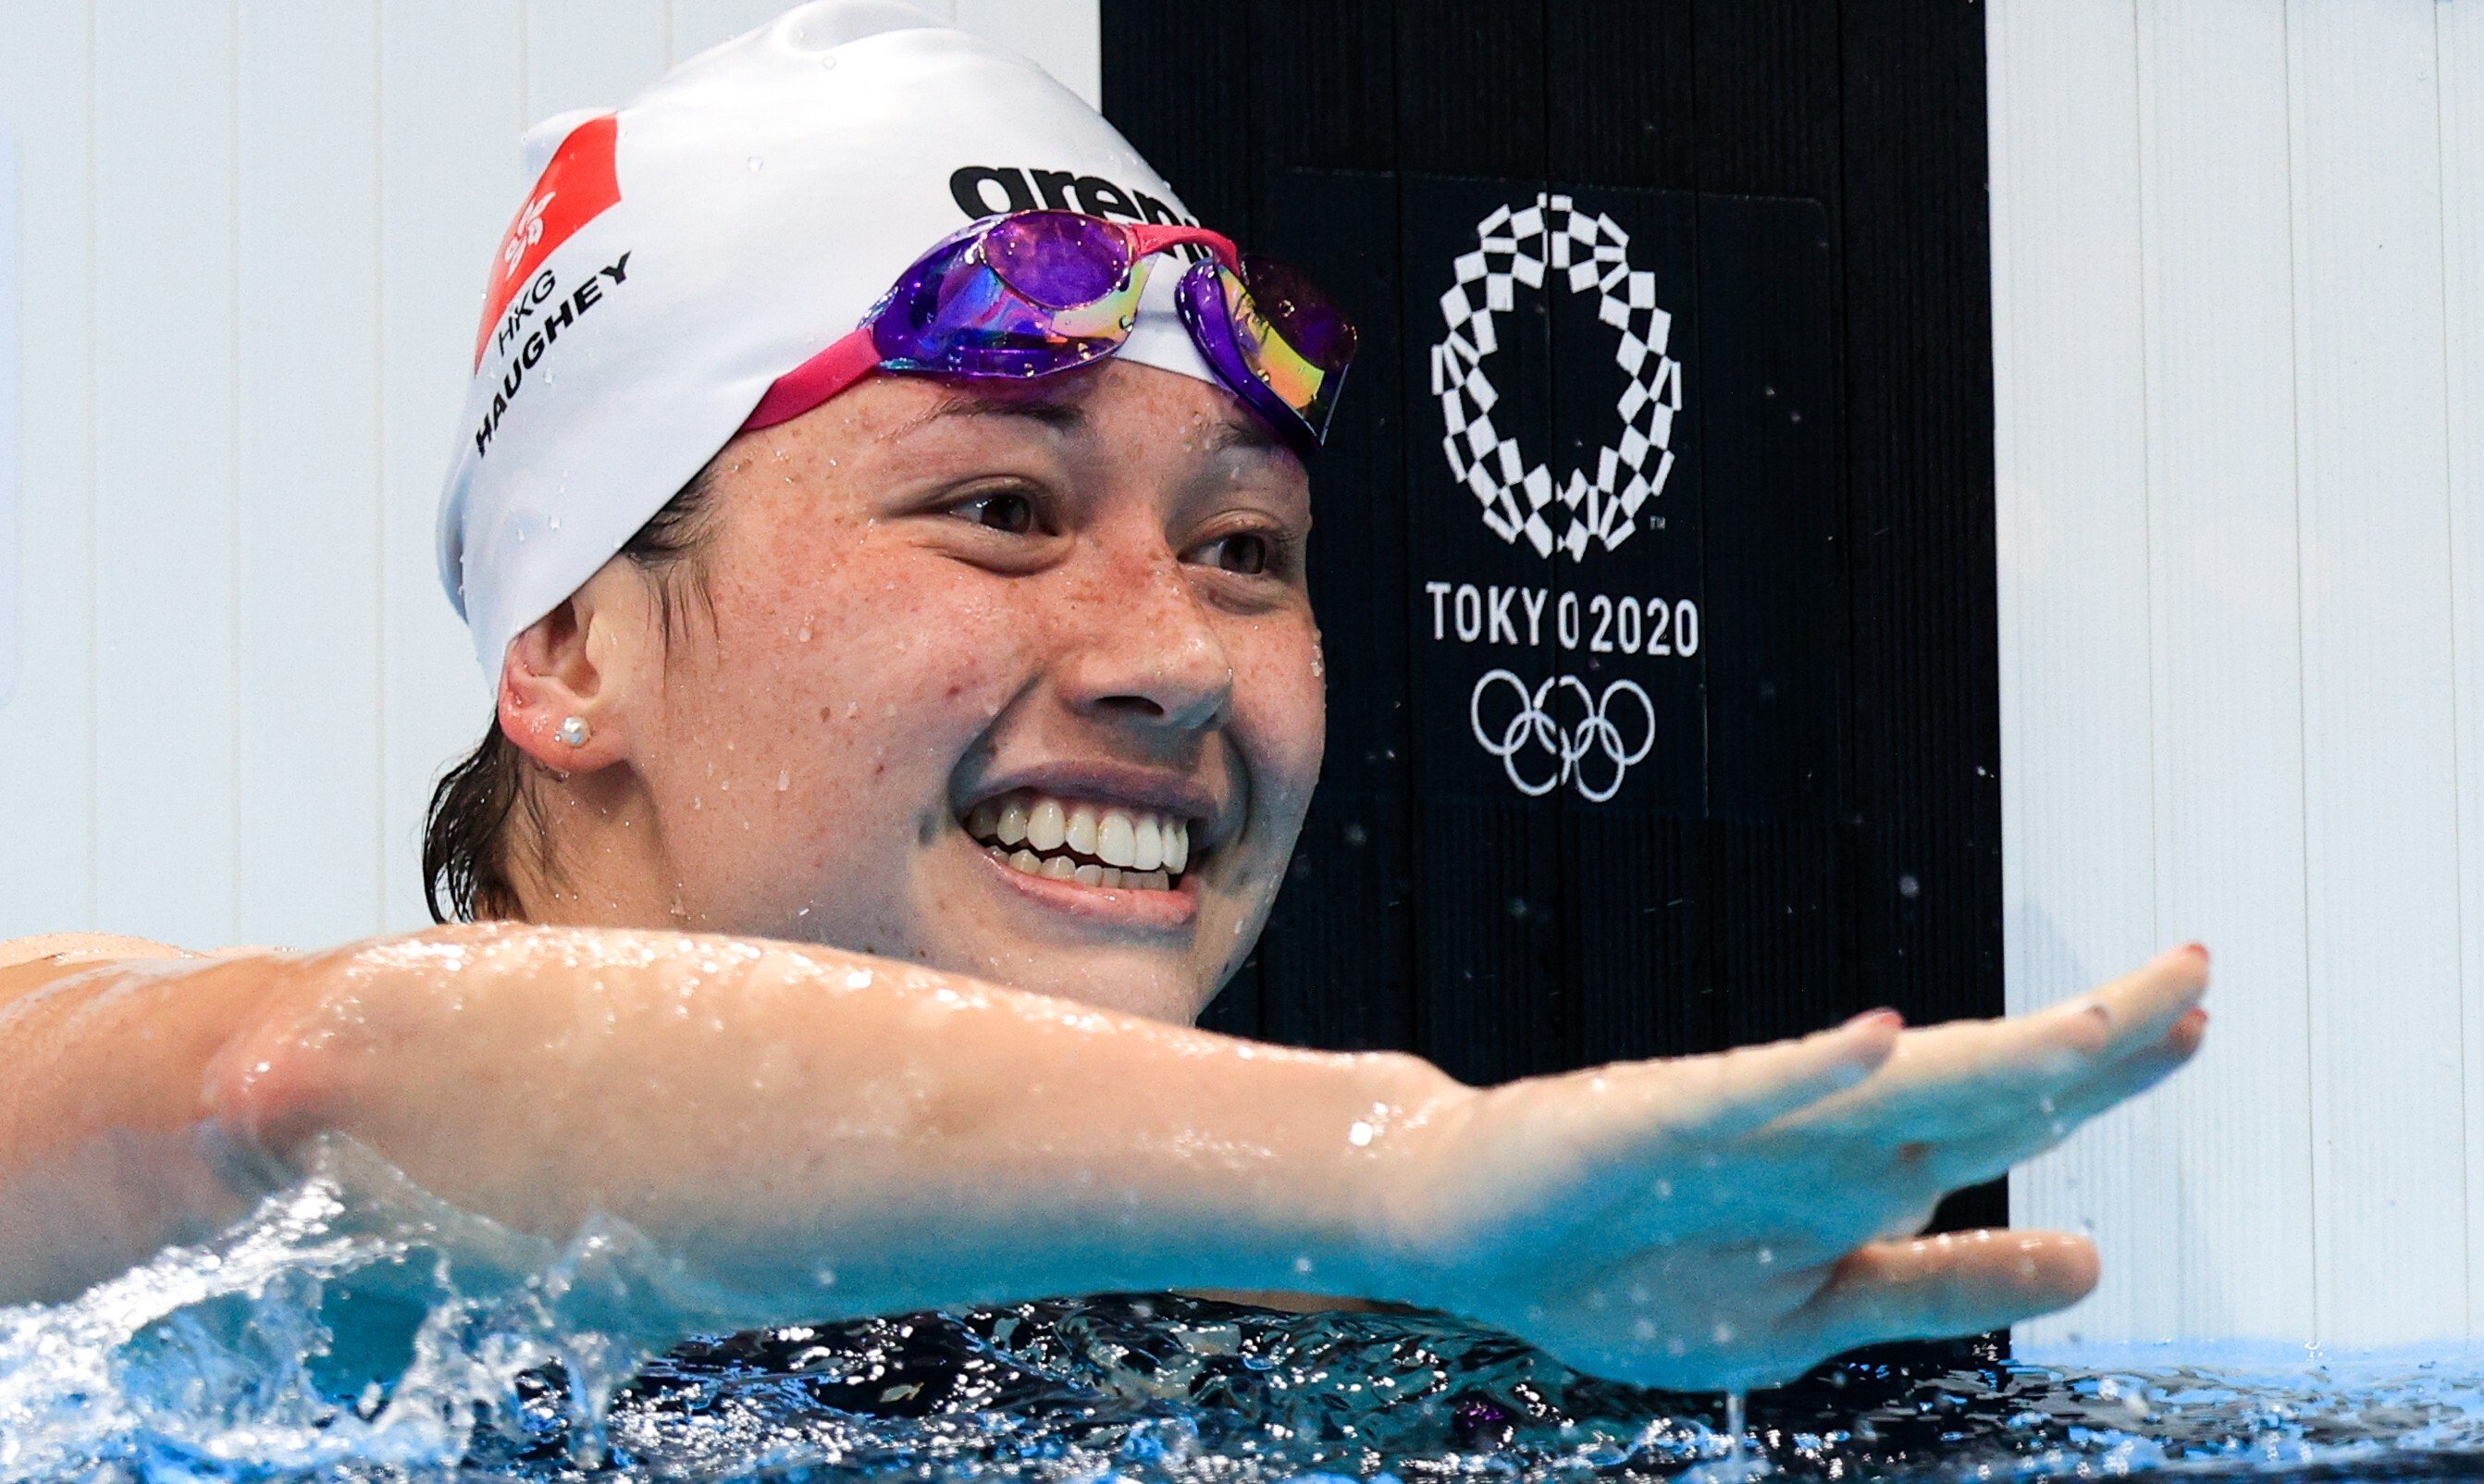 Siobhan Haughey of Hong Kong celebrates as she wins silver in the women’s 200m freestyle final at Tokyo Aquatics Centre during the Tokyo 2020 Olympic Games. Photo: Getty Images